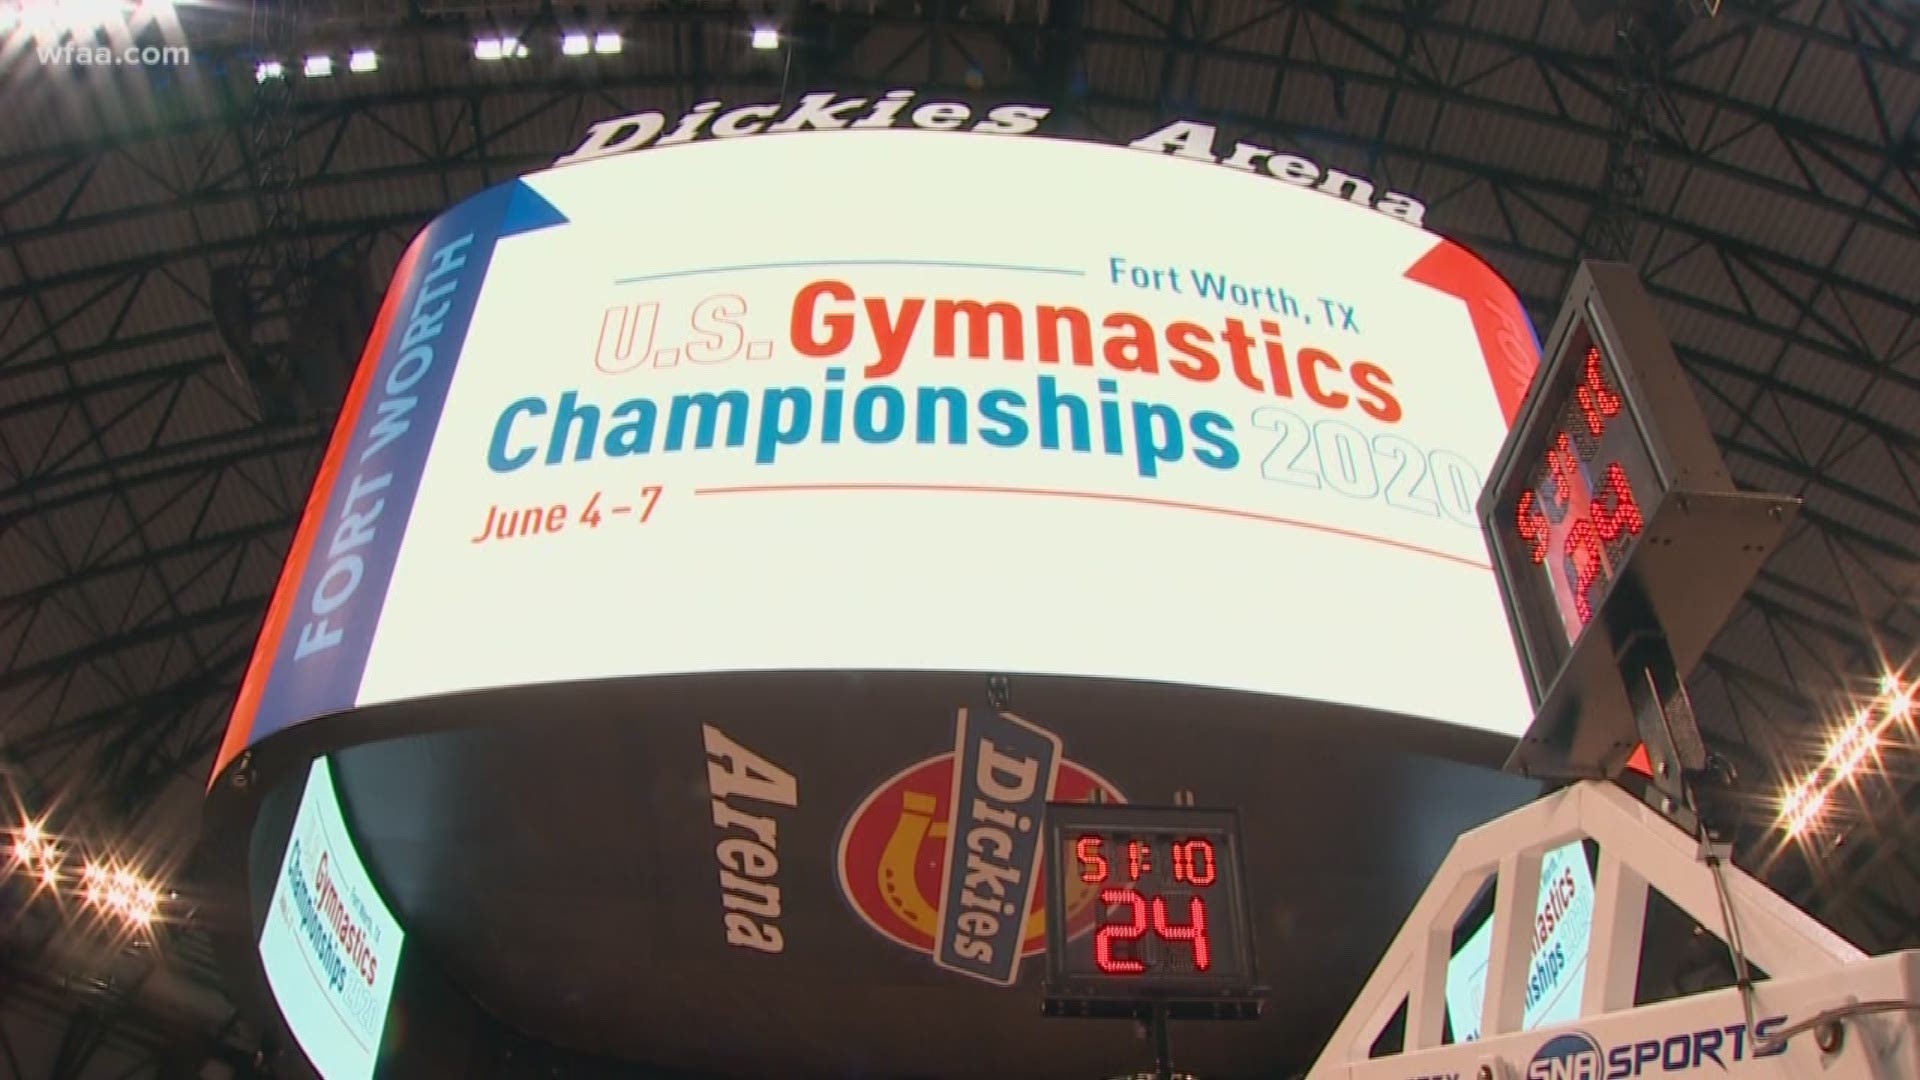 The gateway to the West is now the gateway to Olympic gold. USA Gymnastics announced Wednesday its National Championships will be held in June 2020 at Dickies Arena.